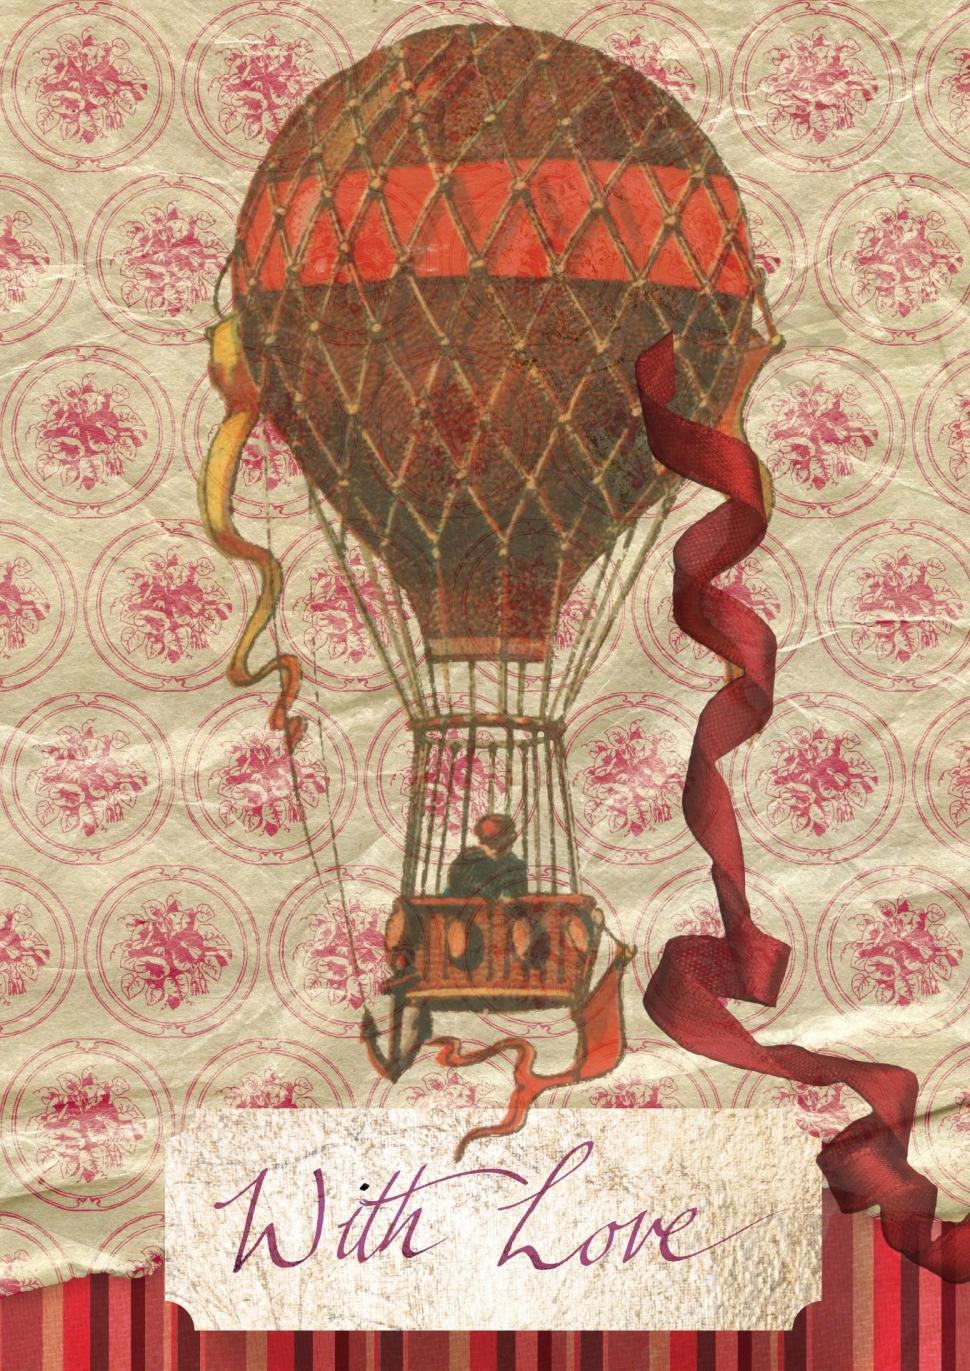 Free Image of Hot Air Balloon Tied With Ribbon 